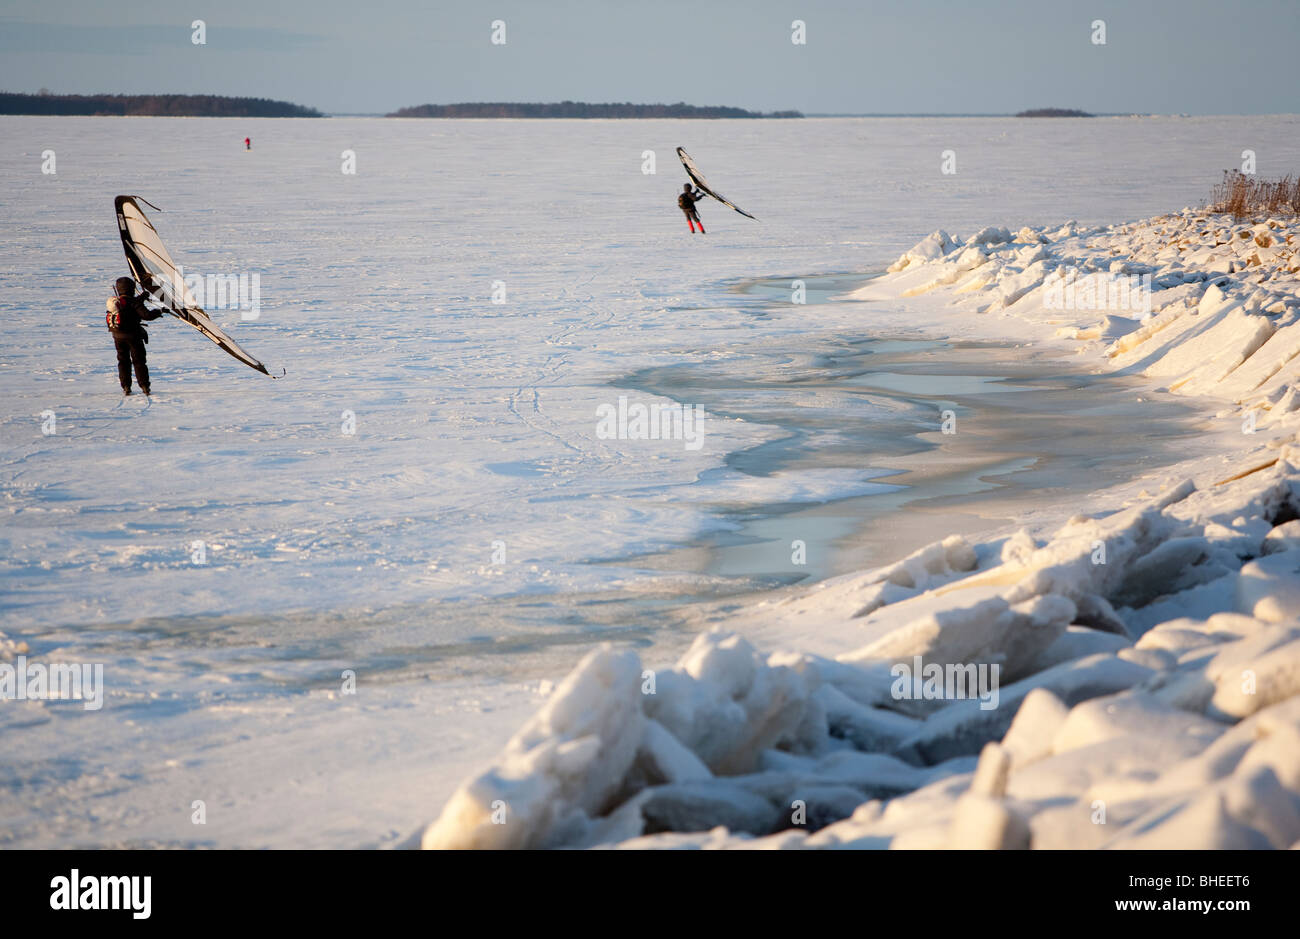 People skiing on sea ice at Wintertime using a kitewing, Finland Stock Photo